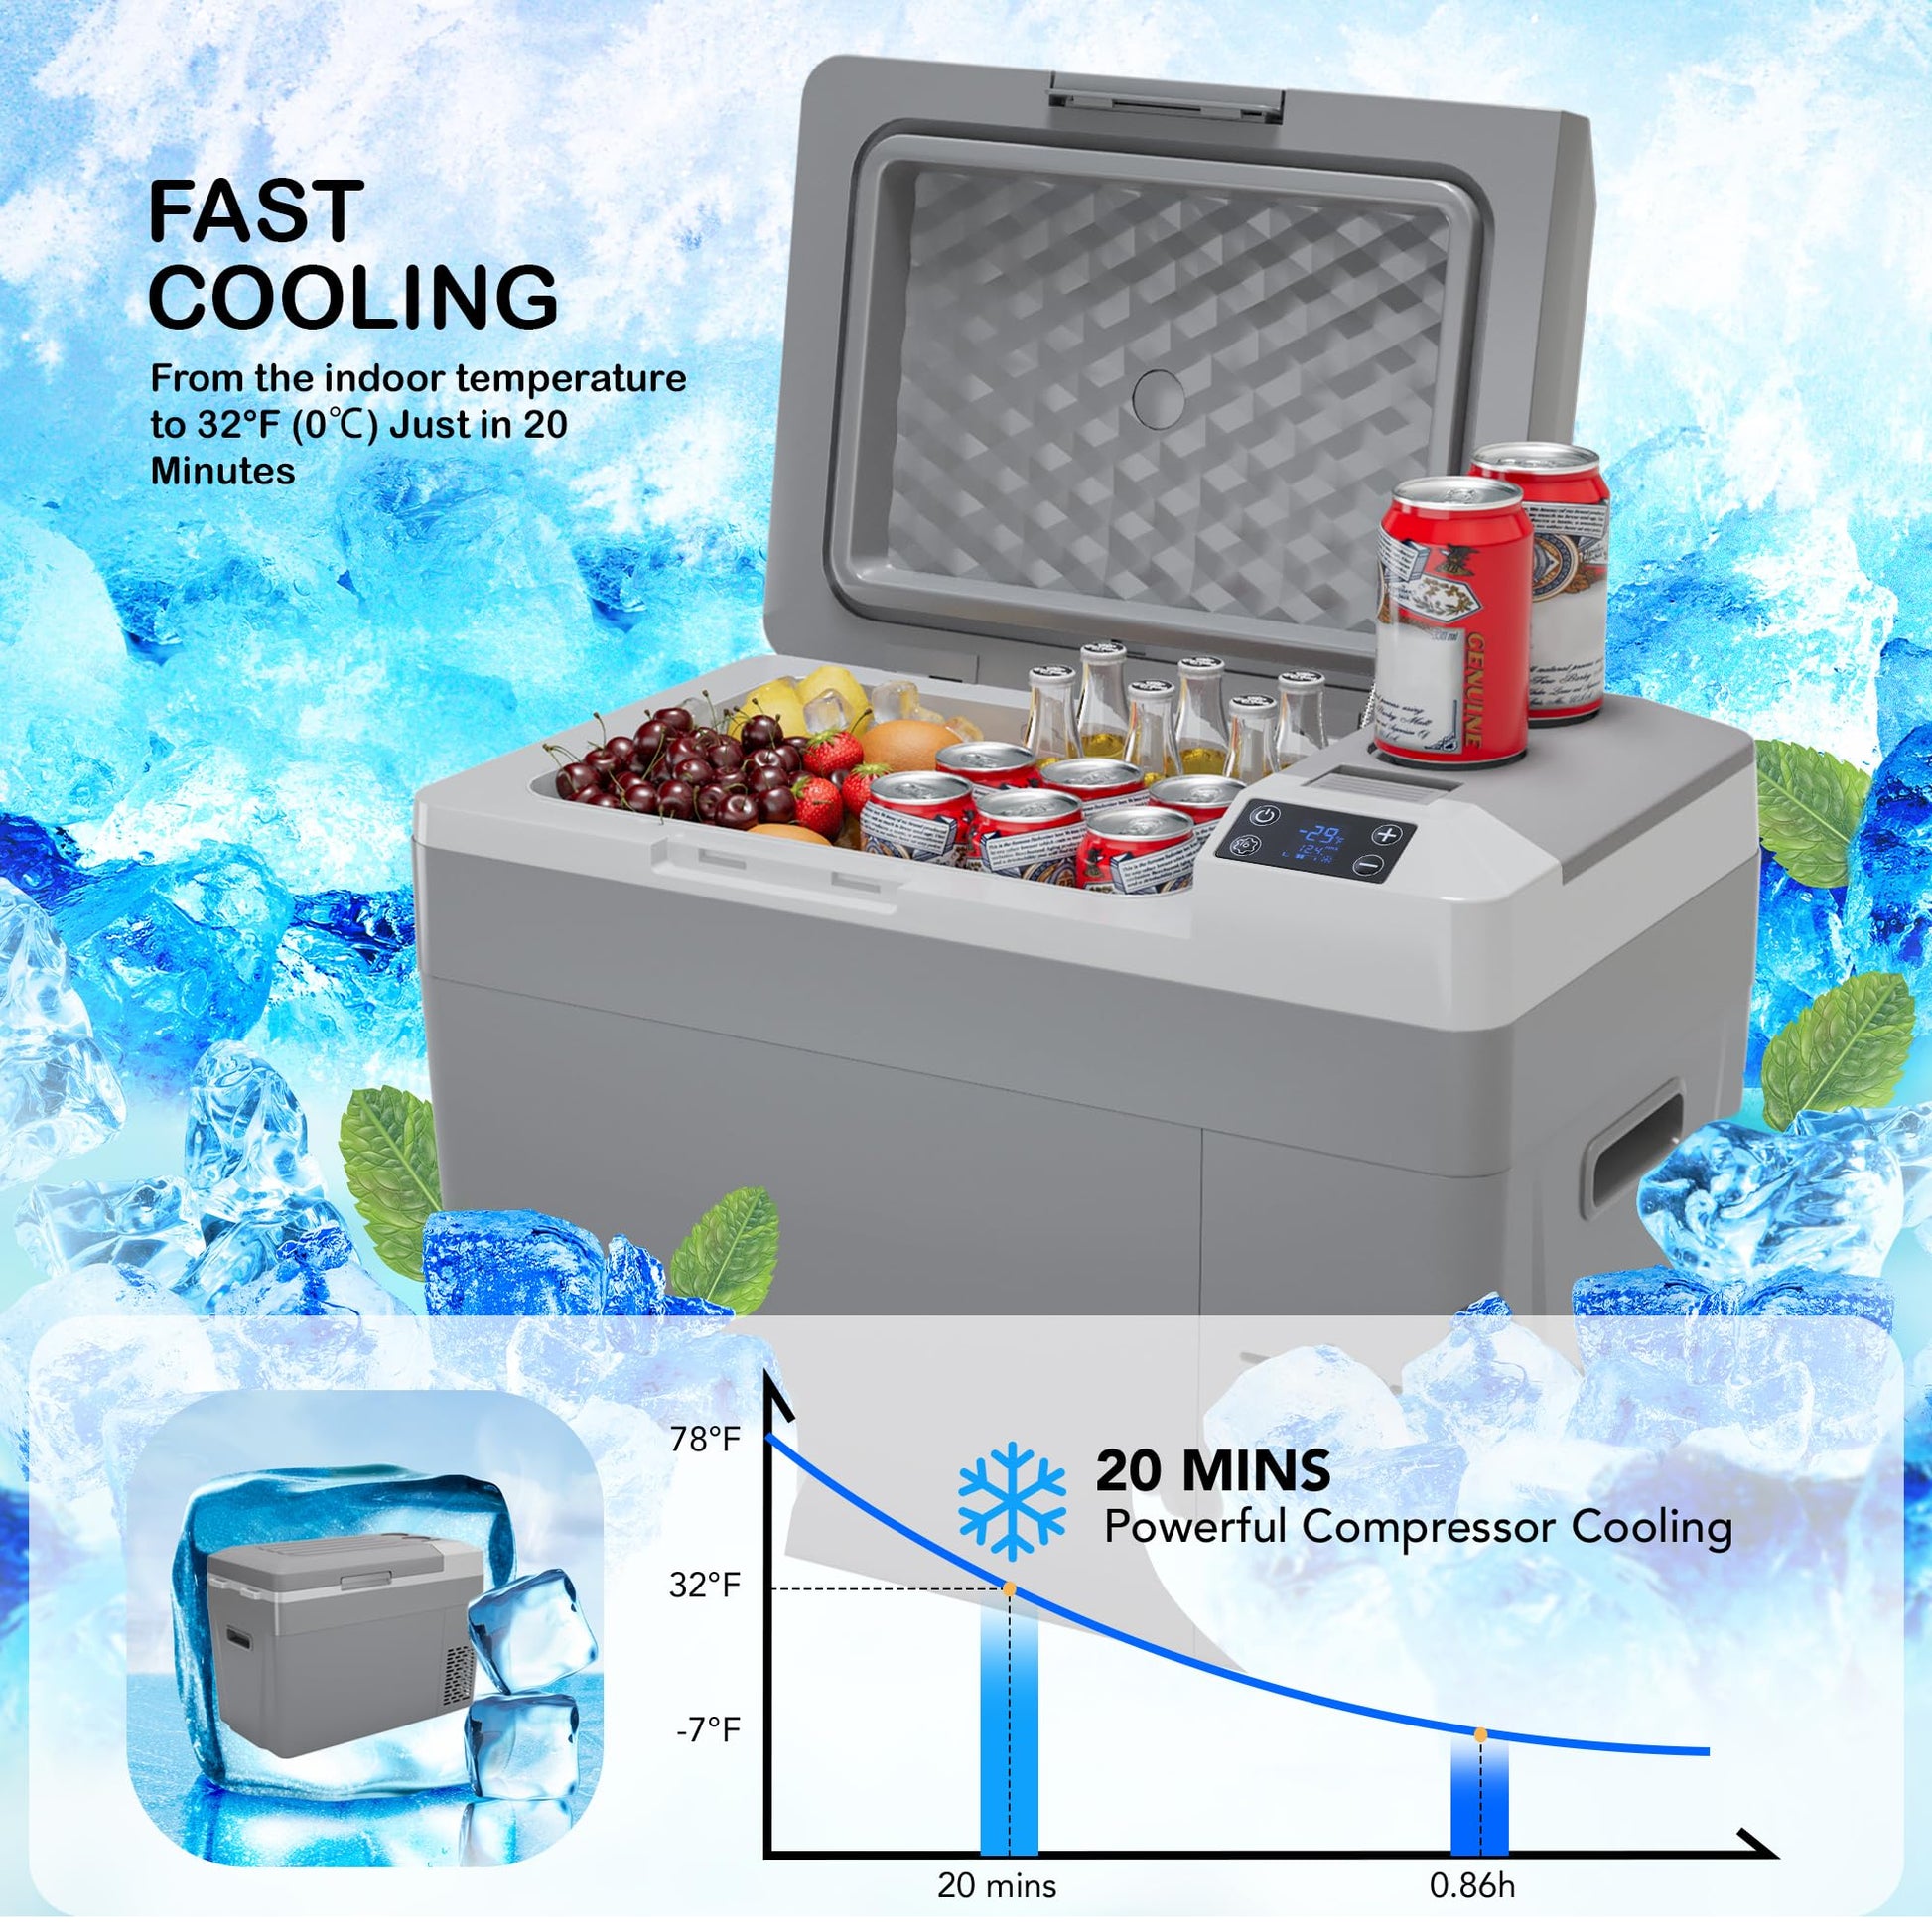 32QT Car Refrigerator with Fast Freeze, 12/24V DC for Travel